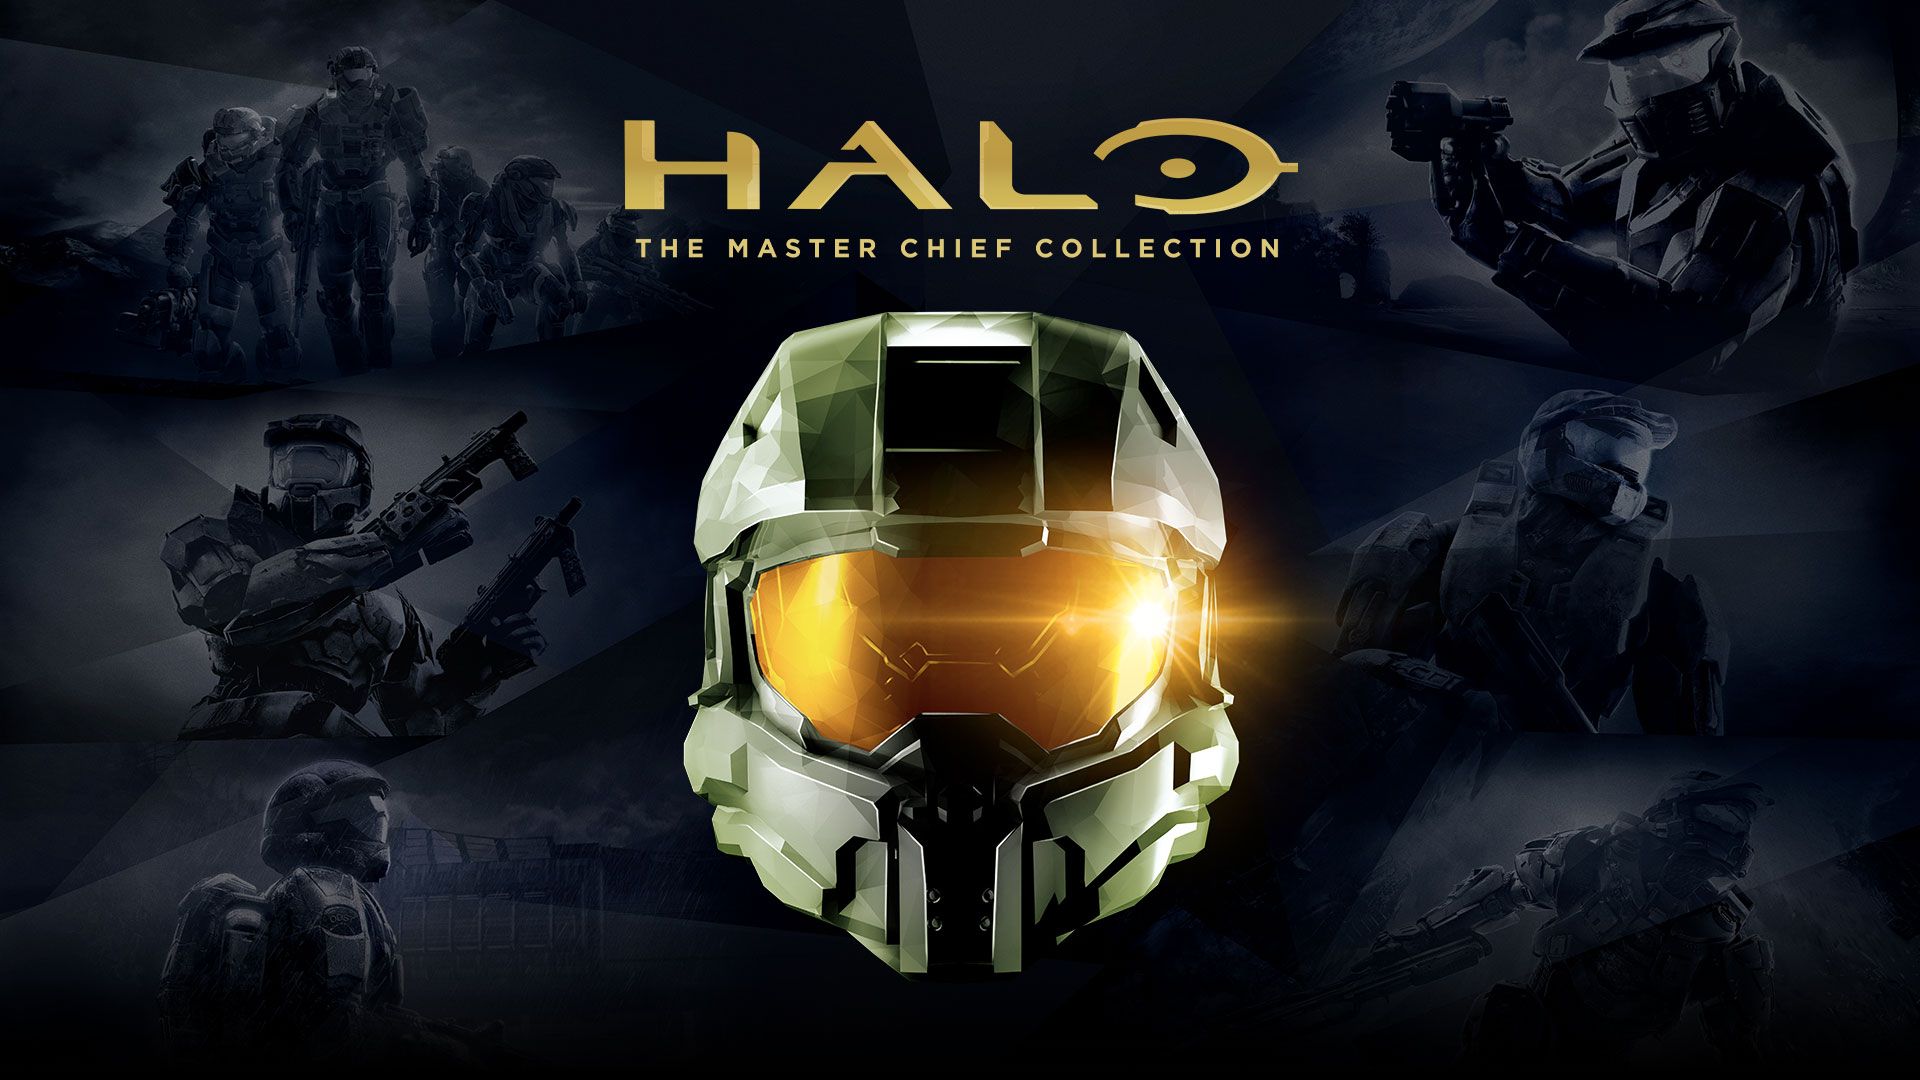 Halo: The Master Chief Collection Crossplay coming to Xbox One and PC